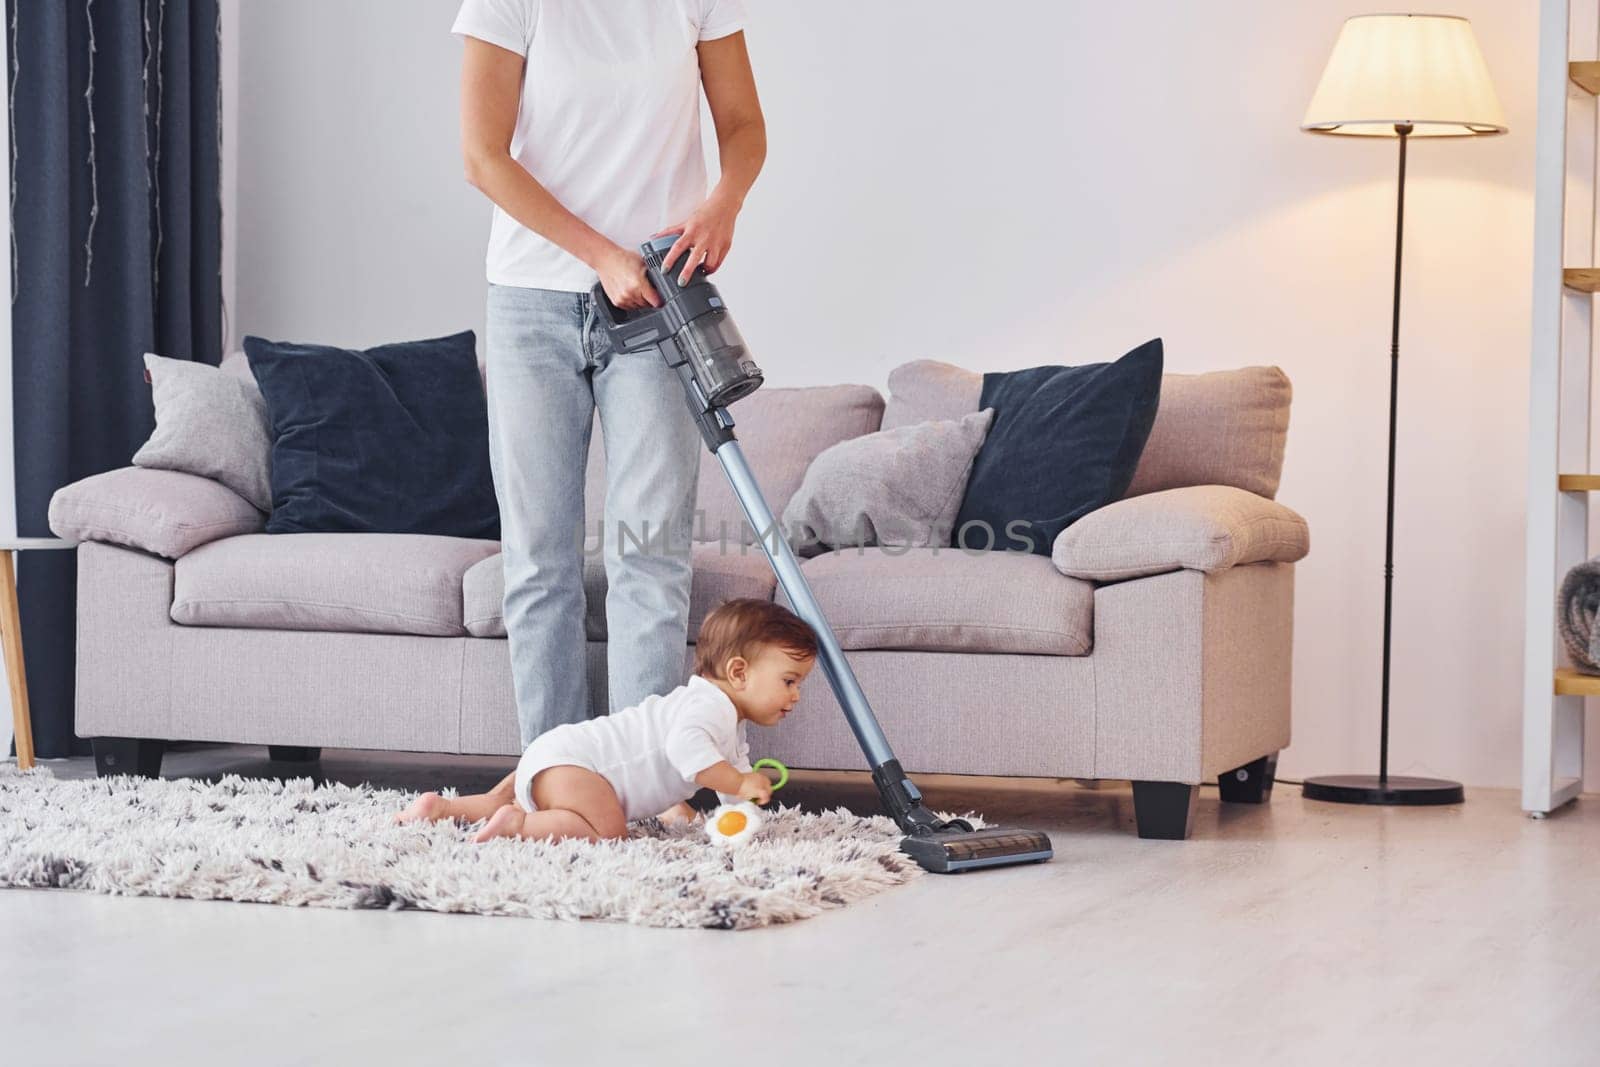 Using of the vacuum cleaner. Mother with her little daughter is indoors at home together.